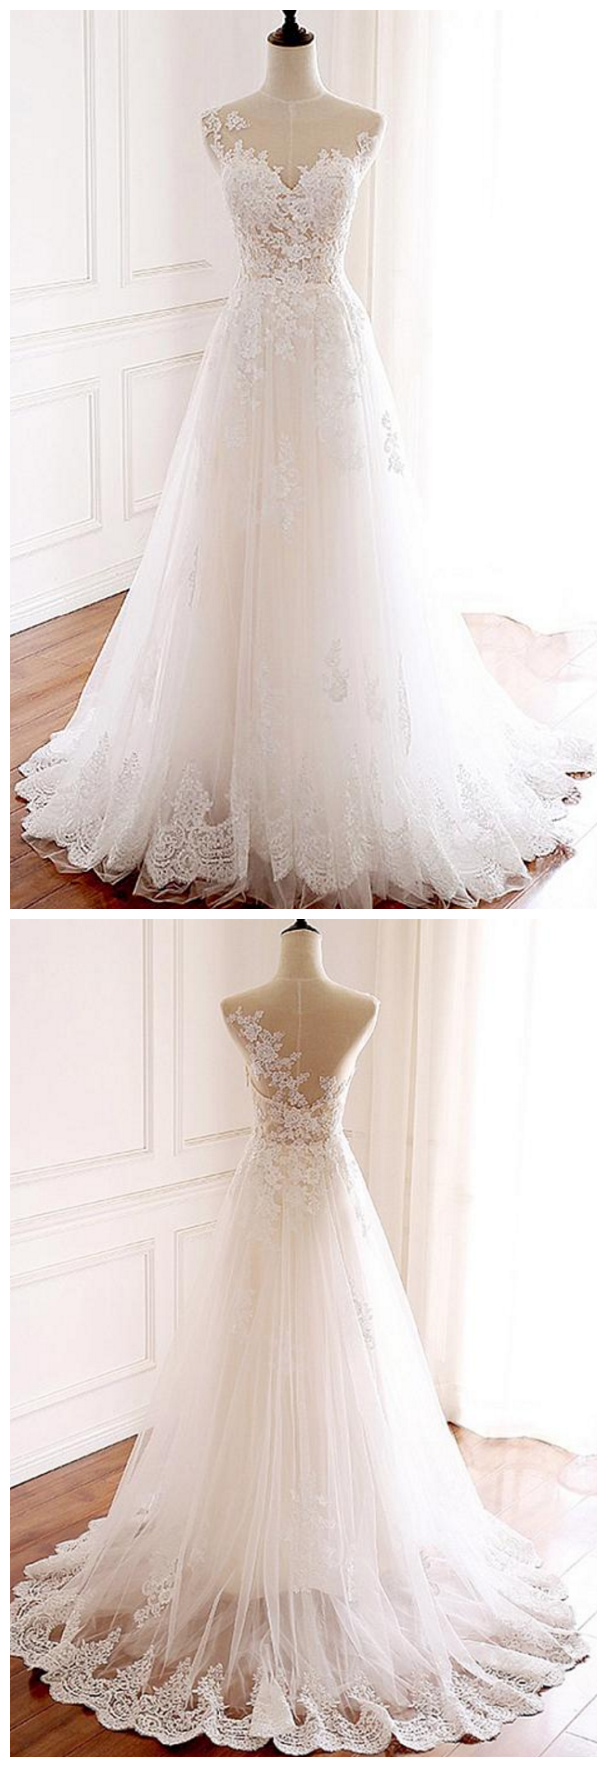 Tulle Jewel Neckline Full-length A-line Wedding Dresses With Lace ...